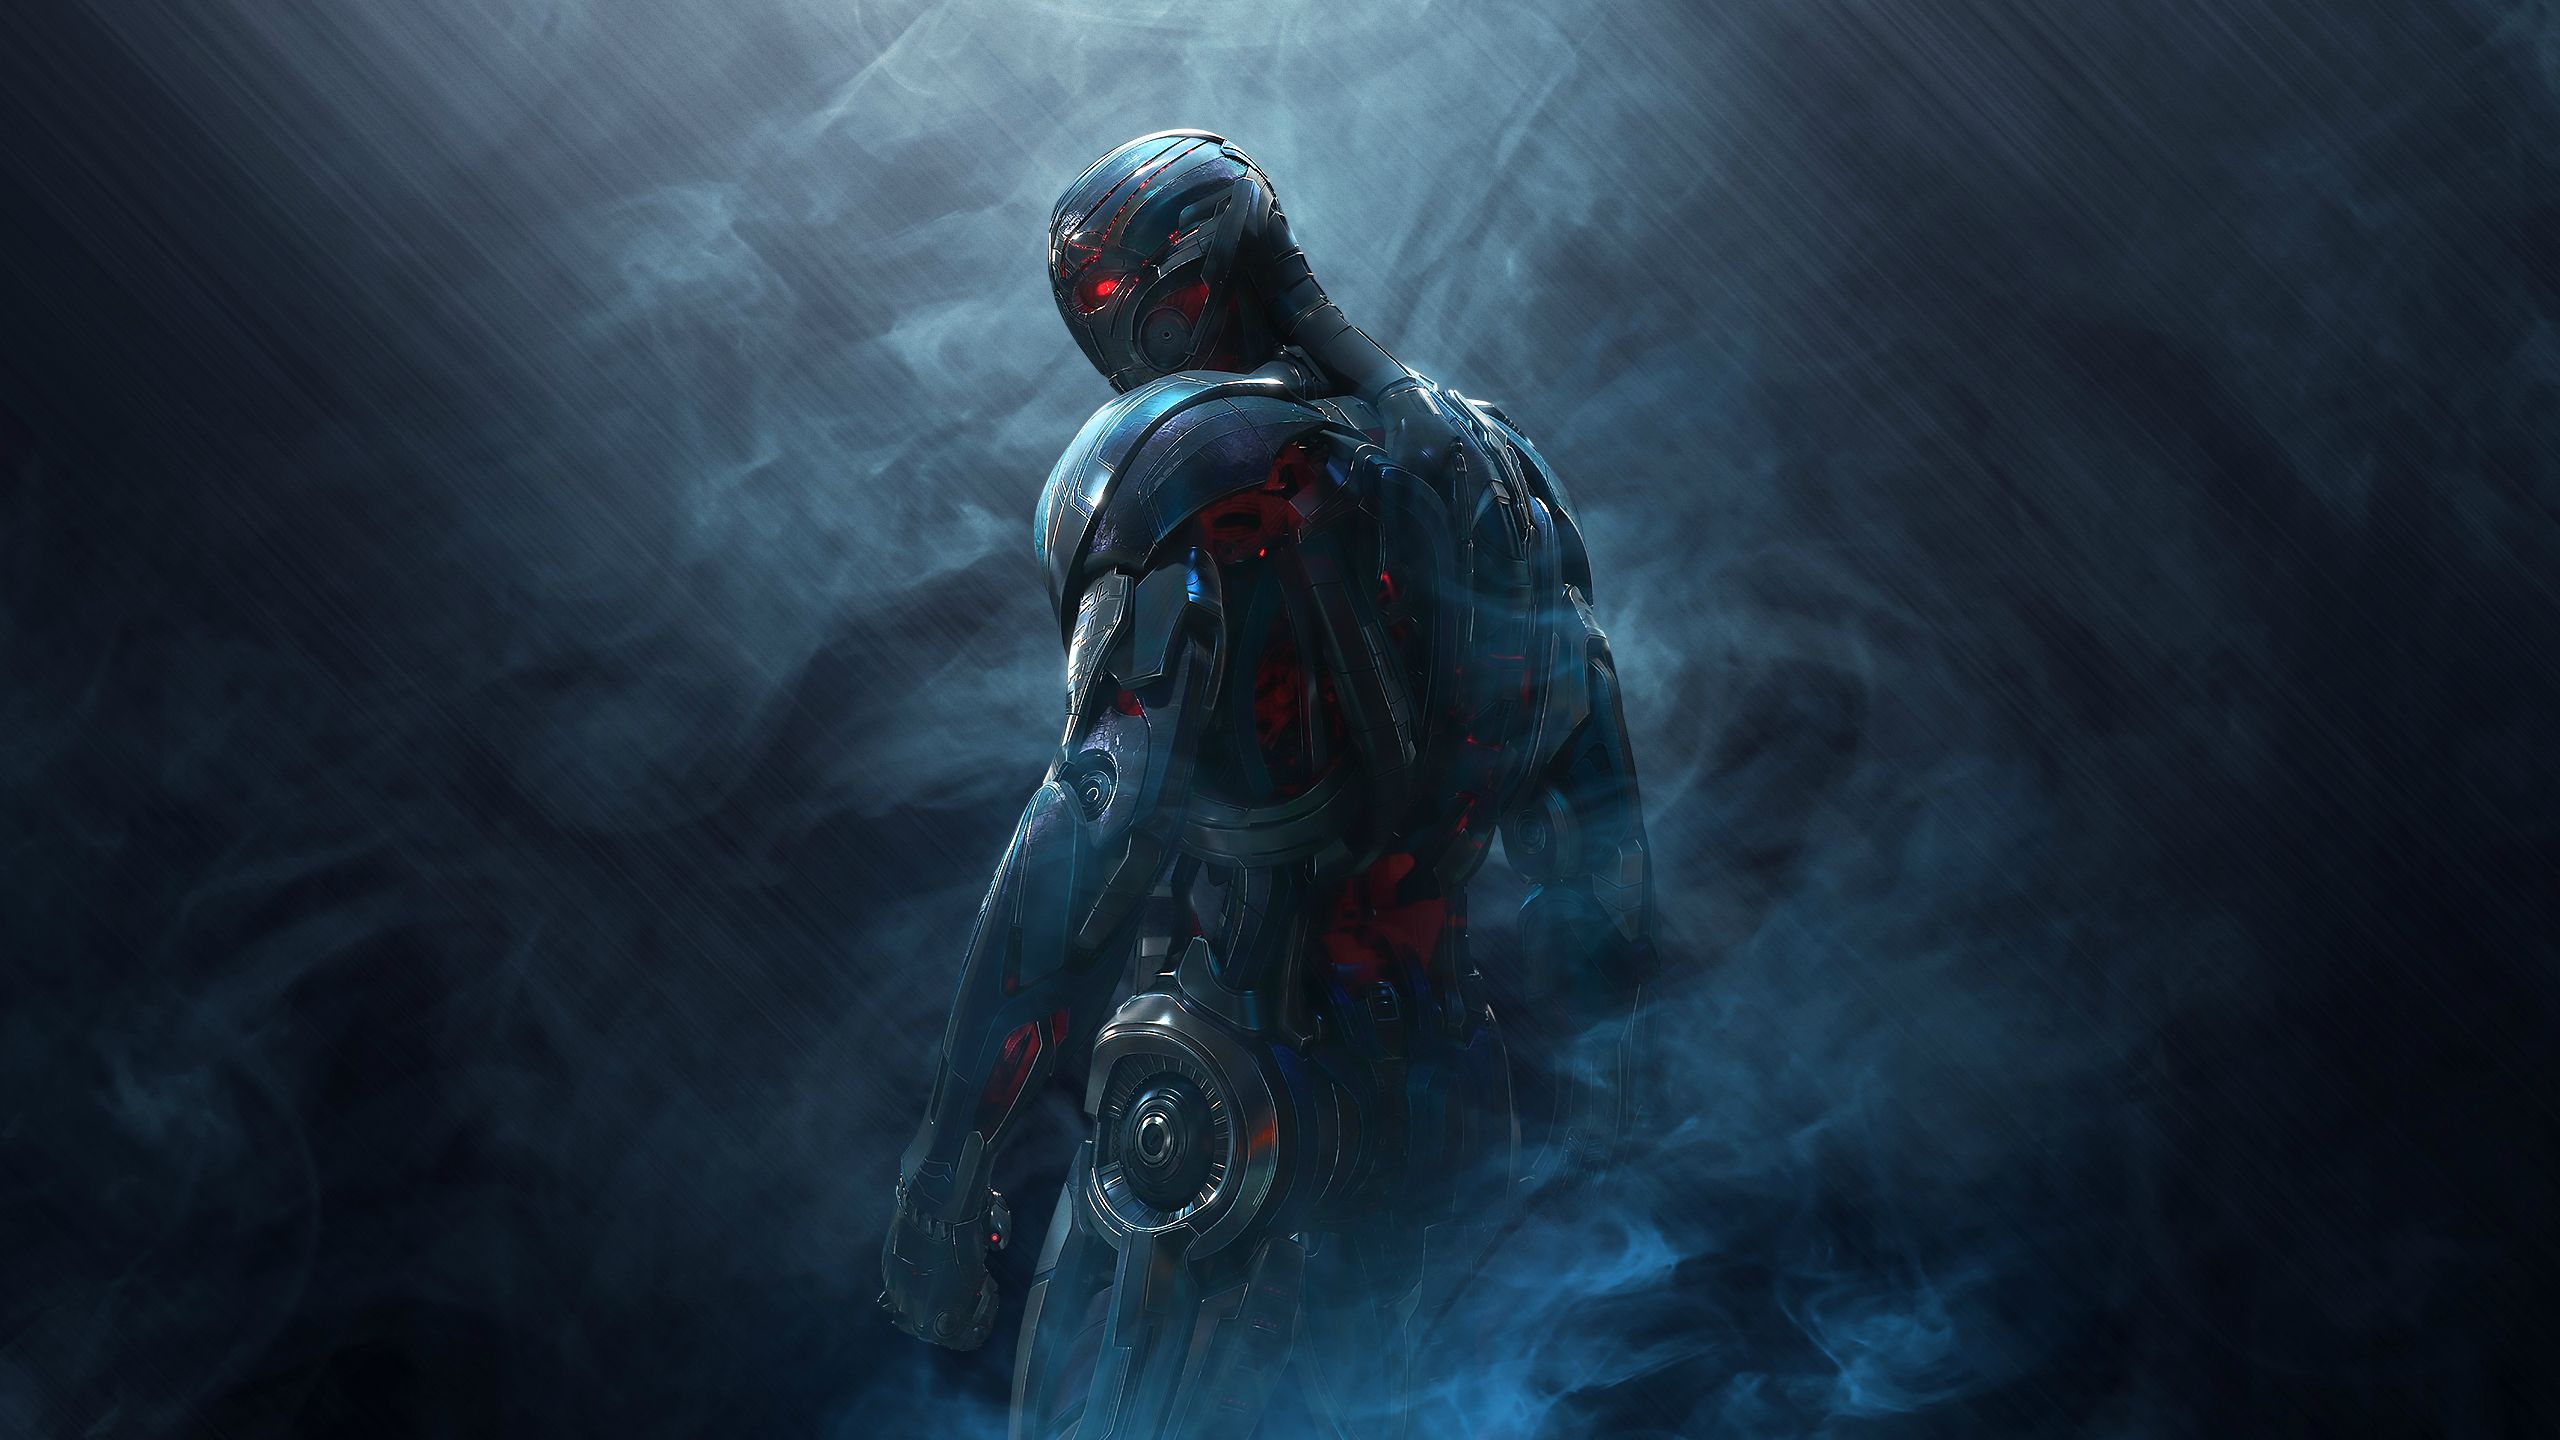 Made A Desktop Background Out Of Ultron S Character Poster Maybe